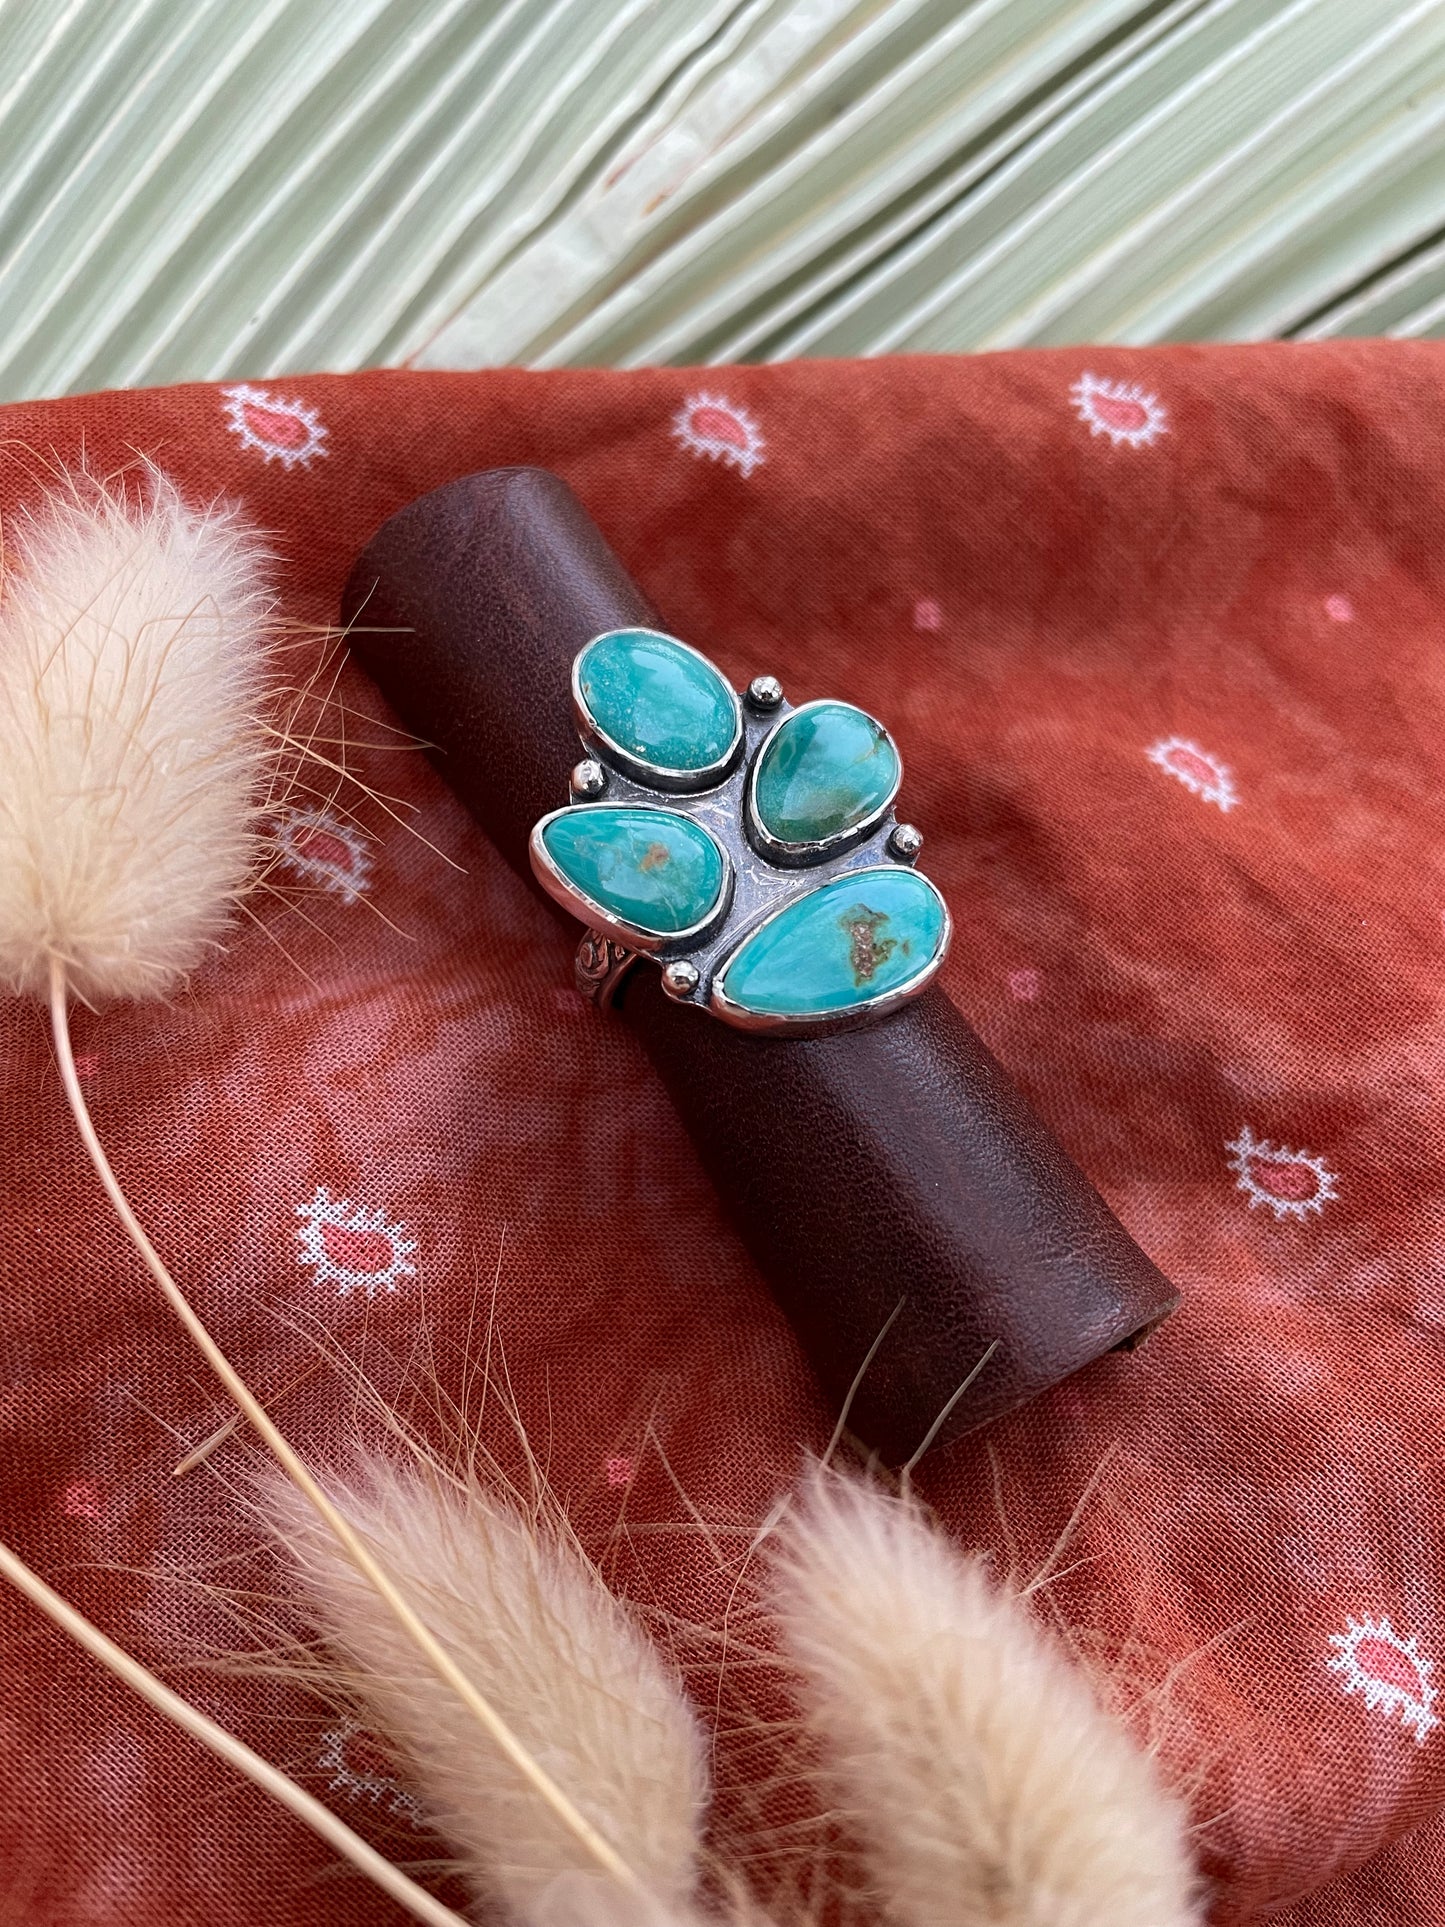 turquoise ring that features four stones in a cluster design.